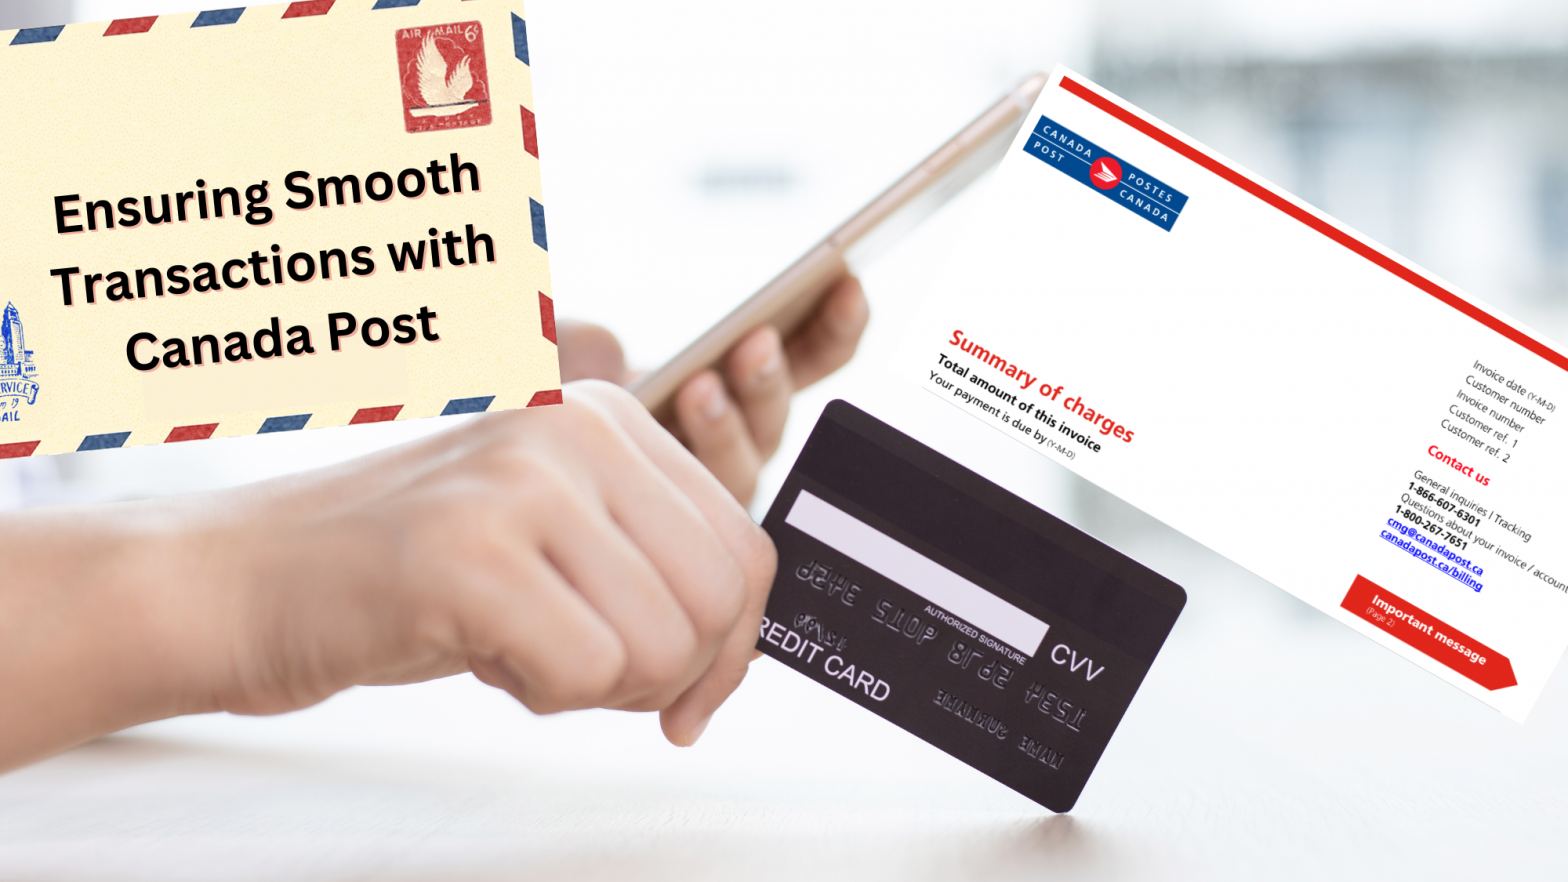 Ensuring Smooth Transactions with Canada Post